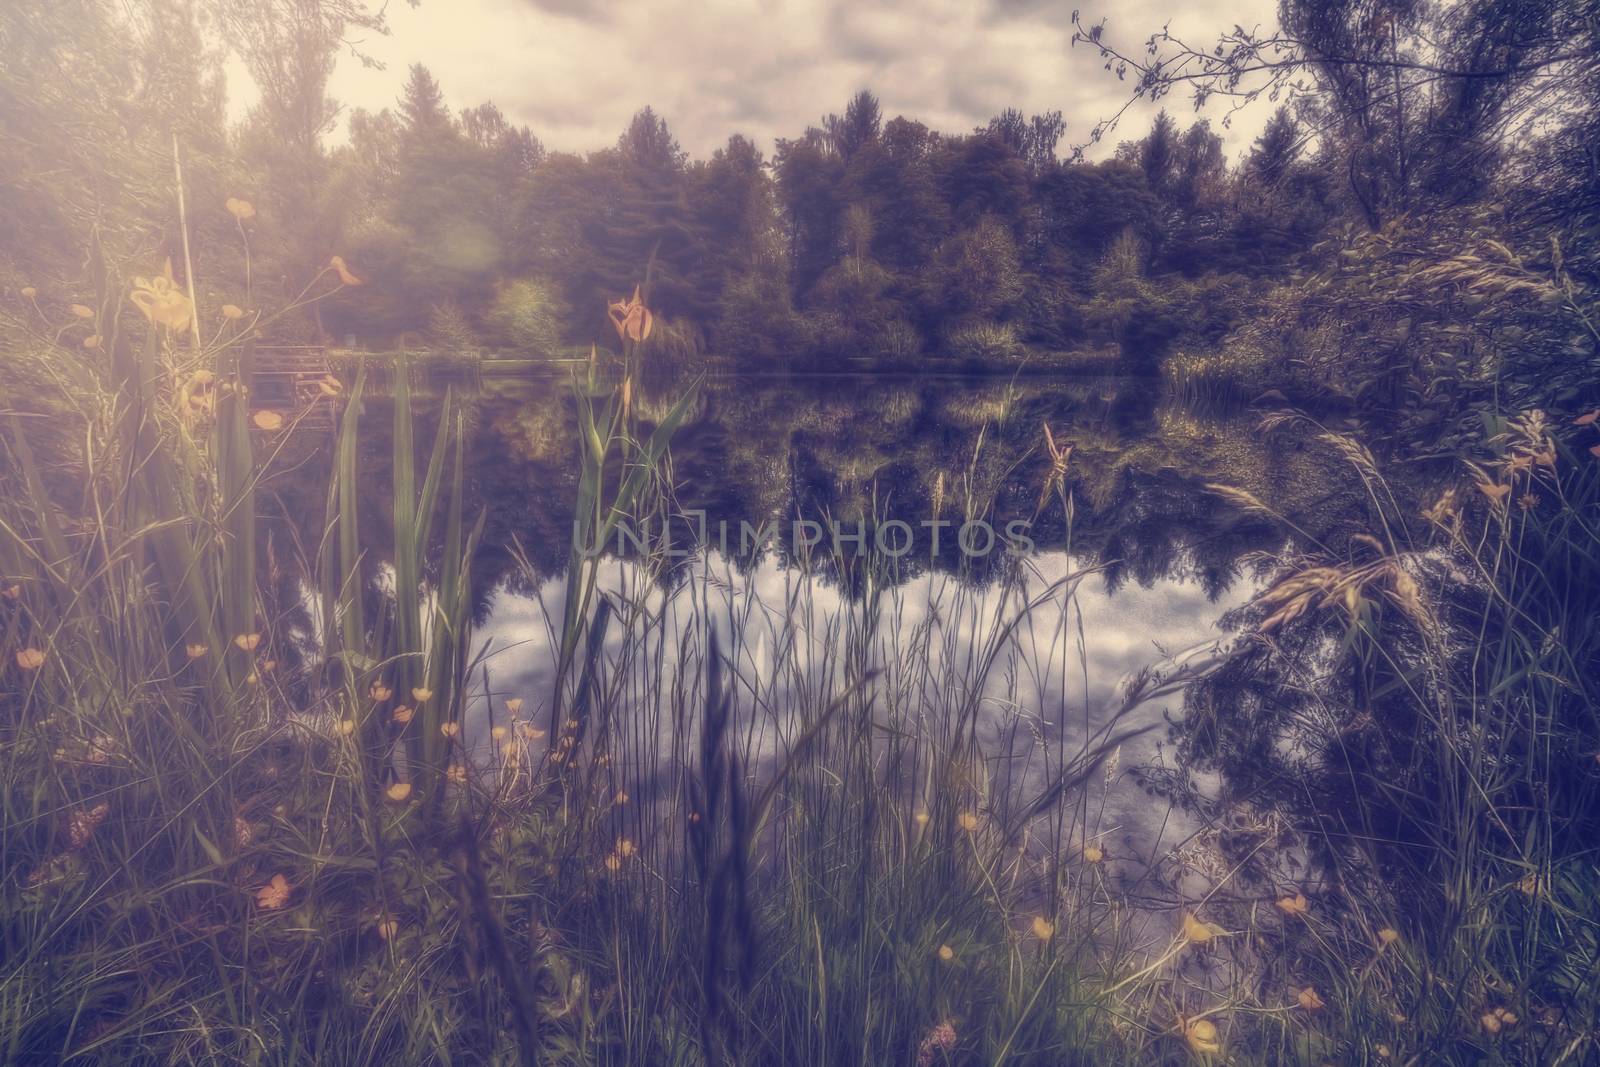 Flower meadow with river view by sandra_fotodesign